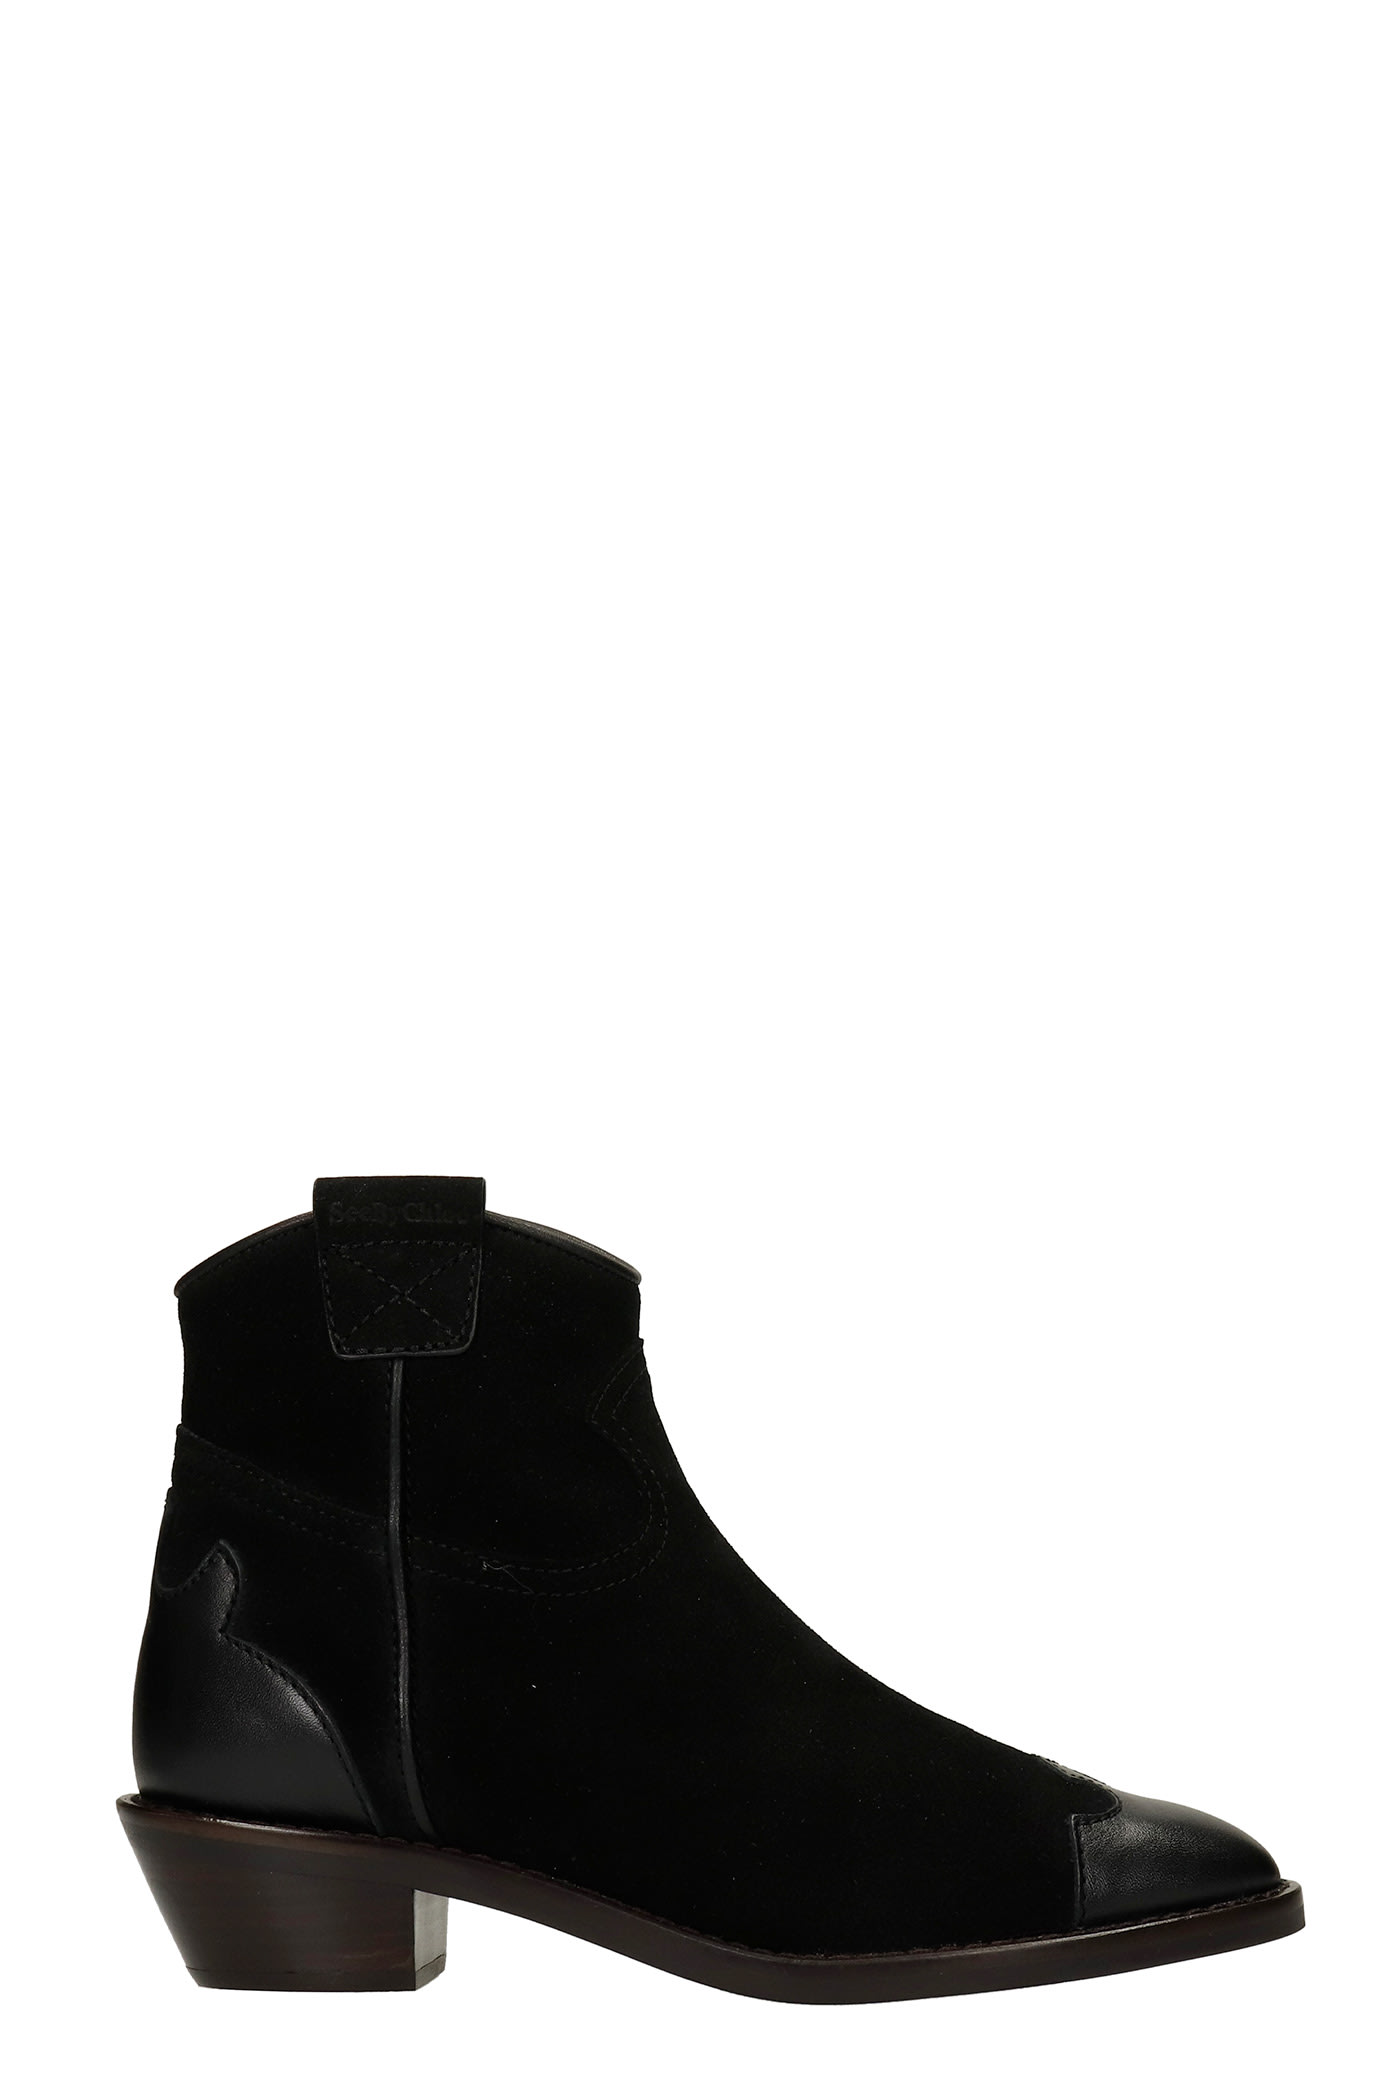 See by Chloé Effie Texan Ankle Boots In Black Suede